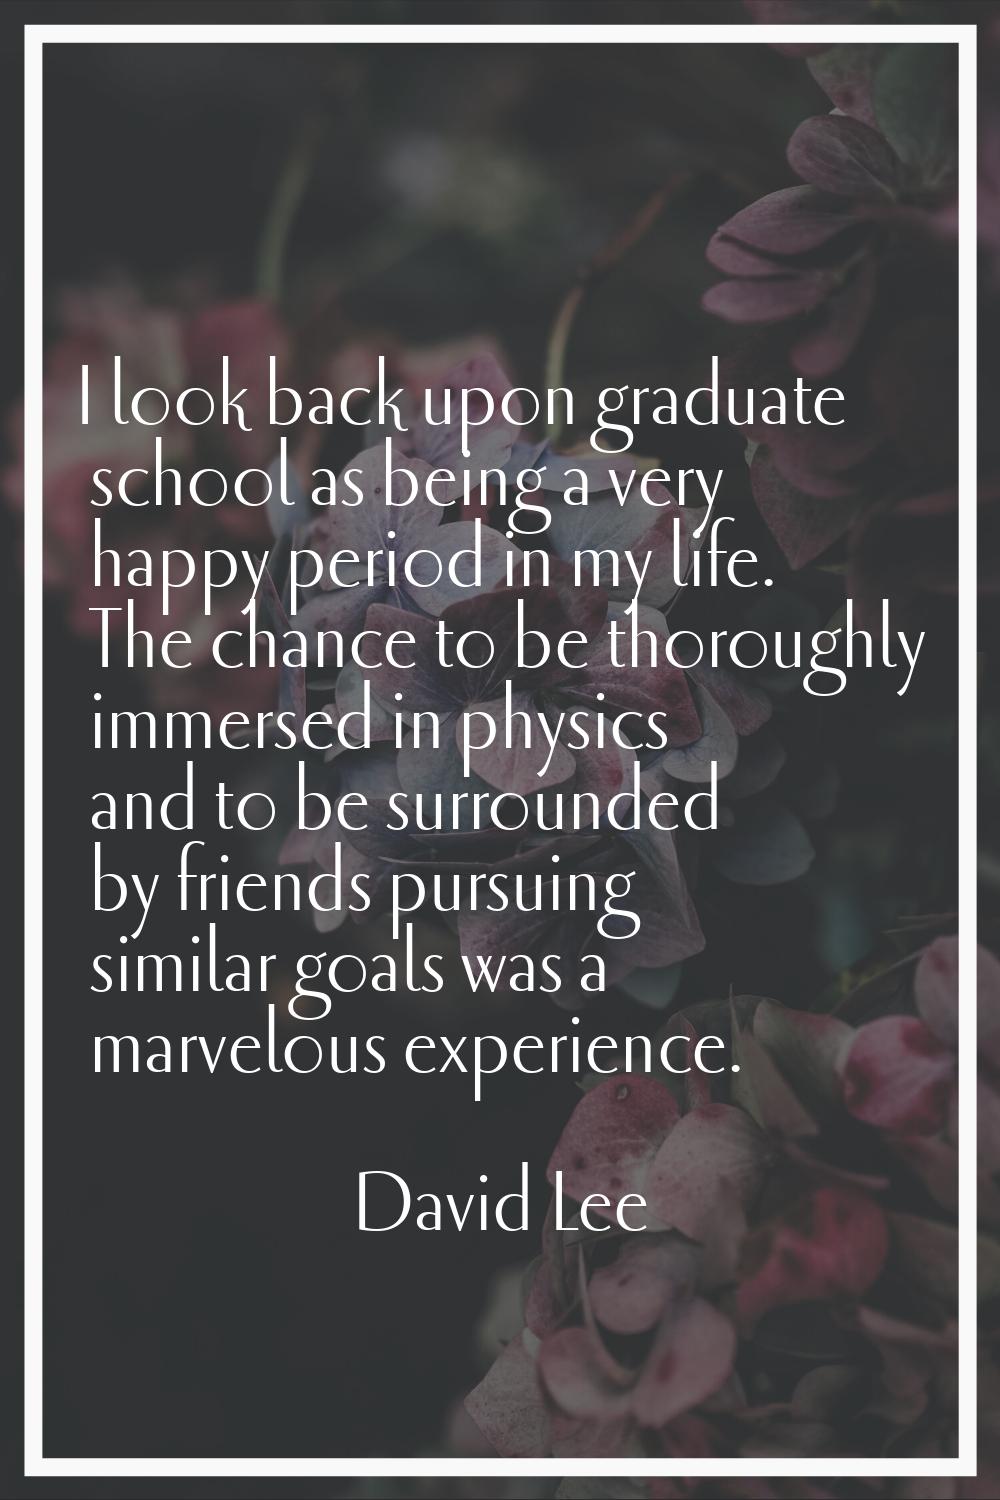 I look back upon graduate school as being a very happy period in my life. The chance to be thorough